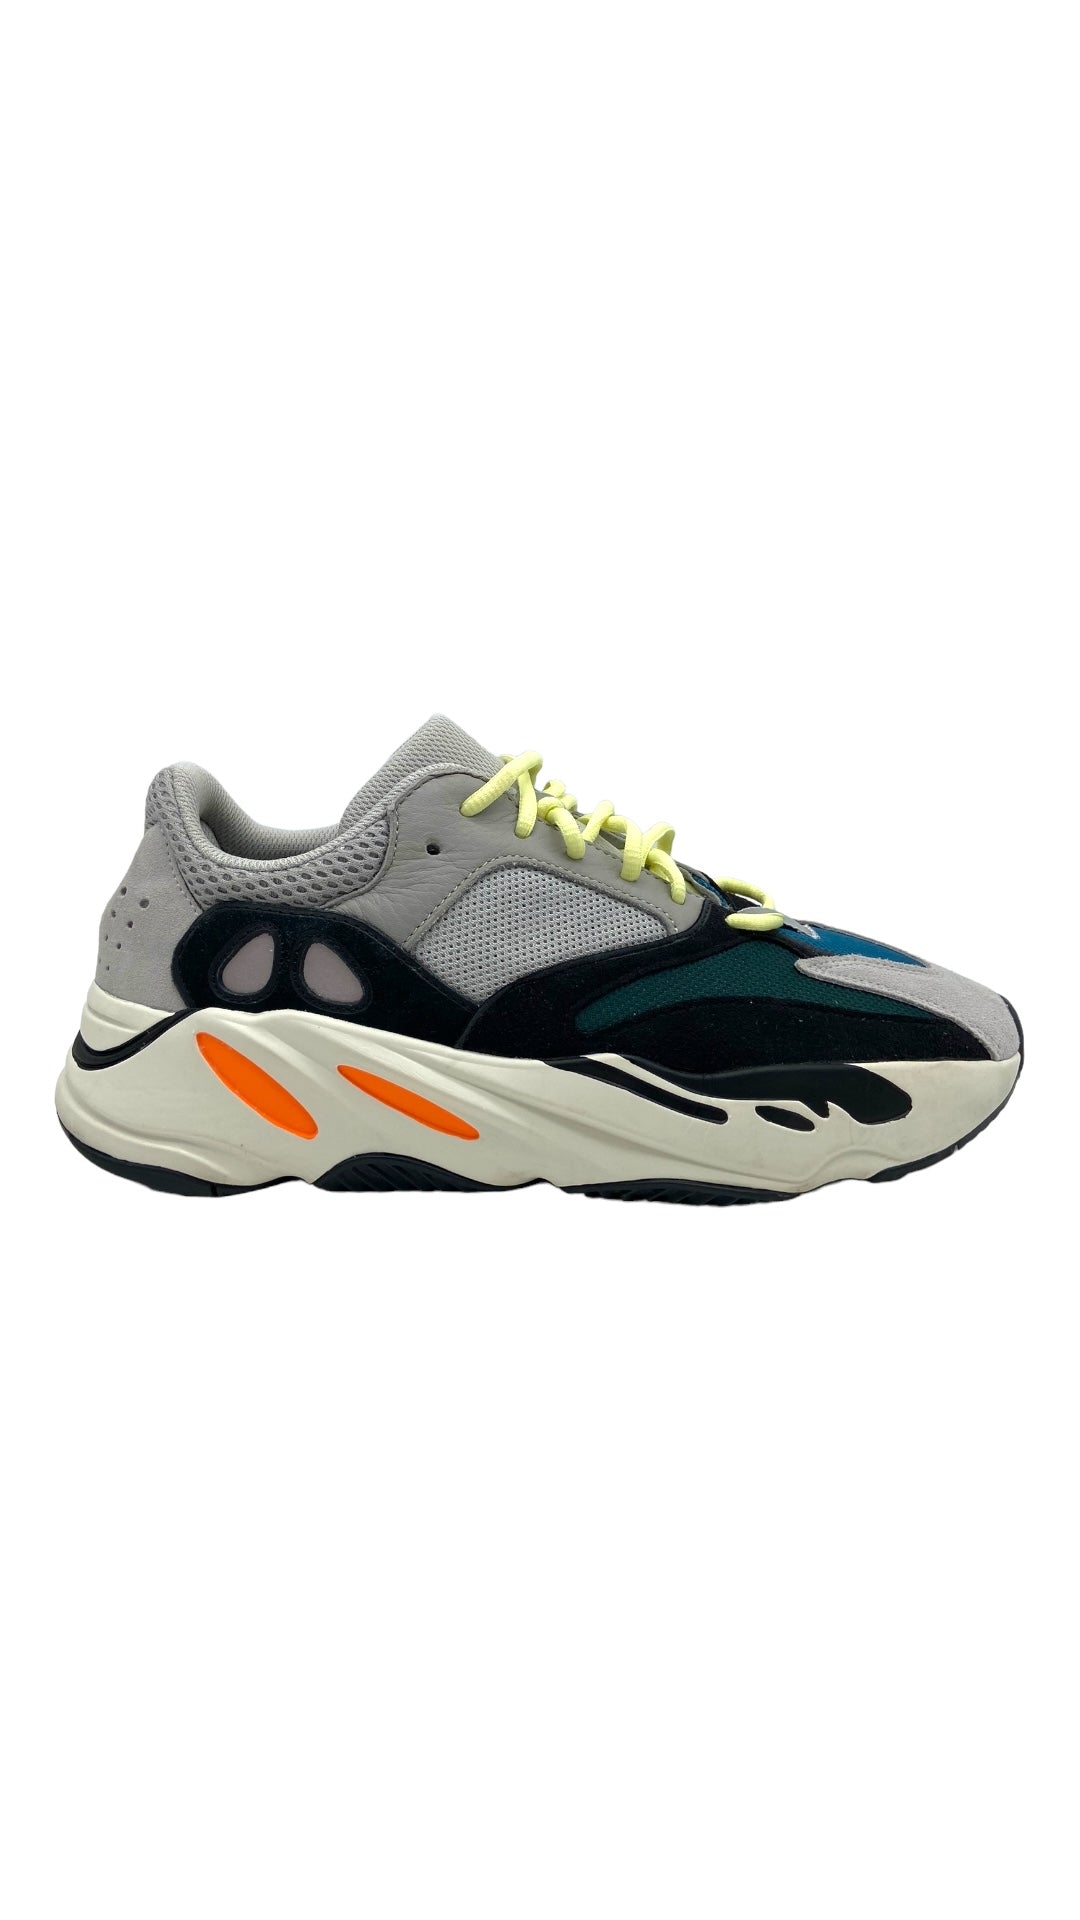 Preowned Yeezy Boost 700 'Wave Runner' 2023 Sz 11M/12.5W